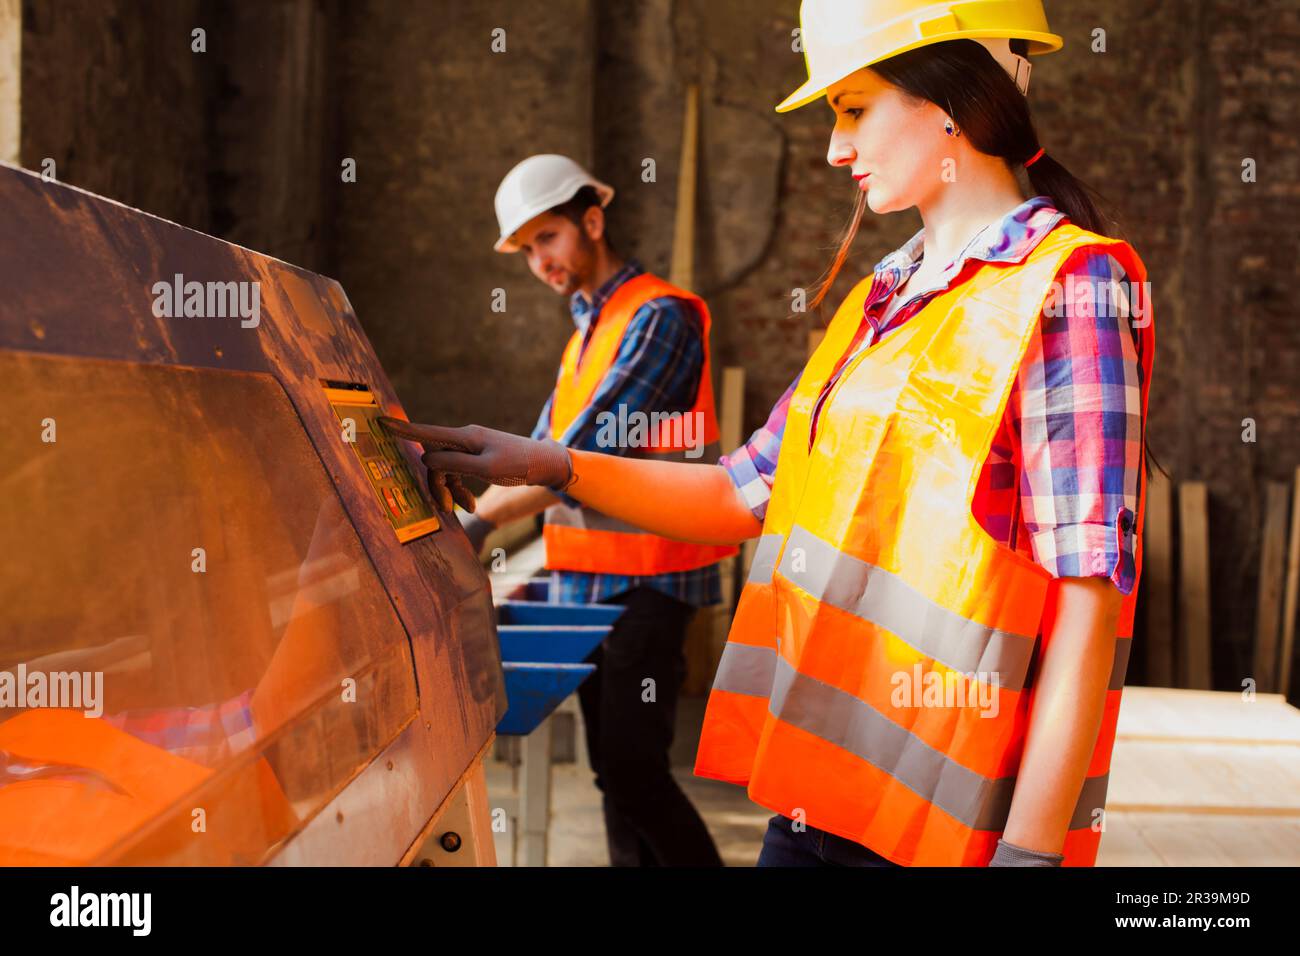 Workwoman in protected helmet and clothes pressing button on woodworking machine. Stock Photo